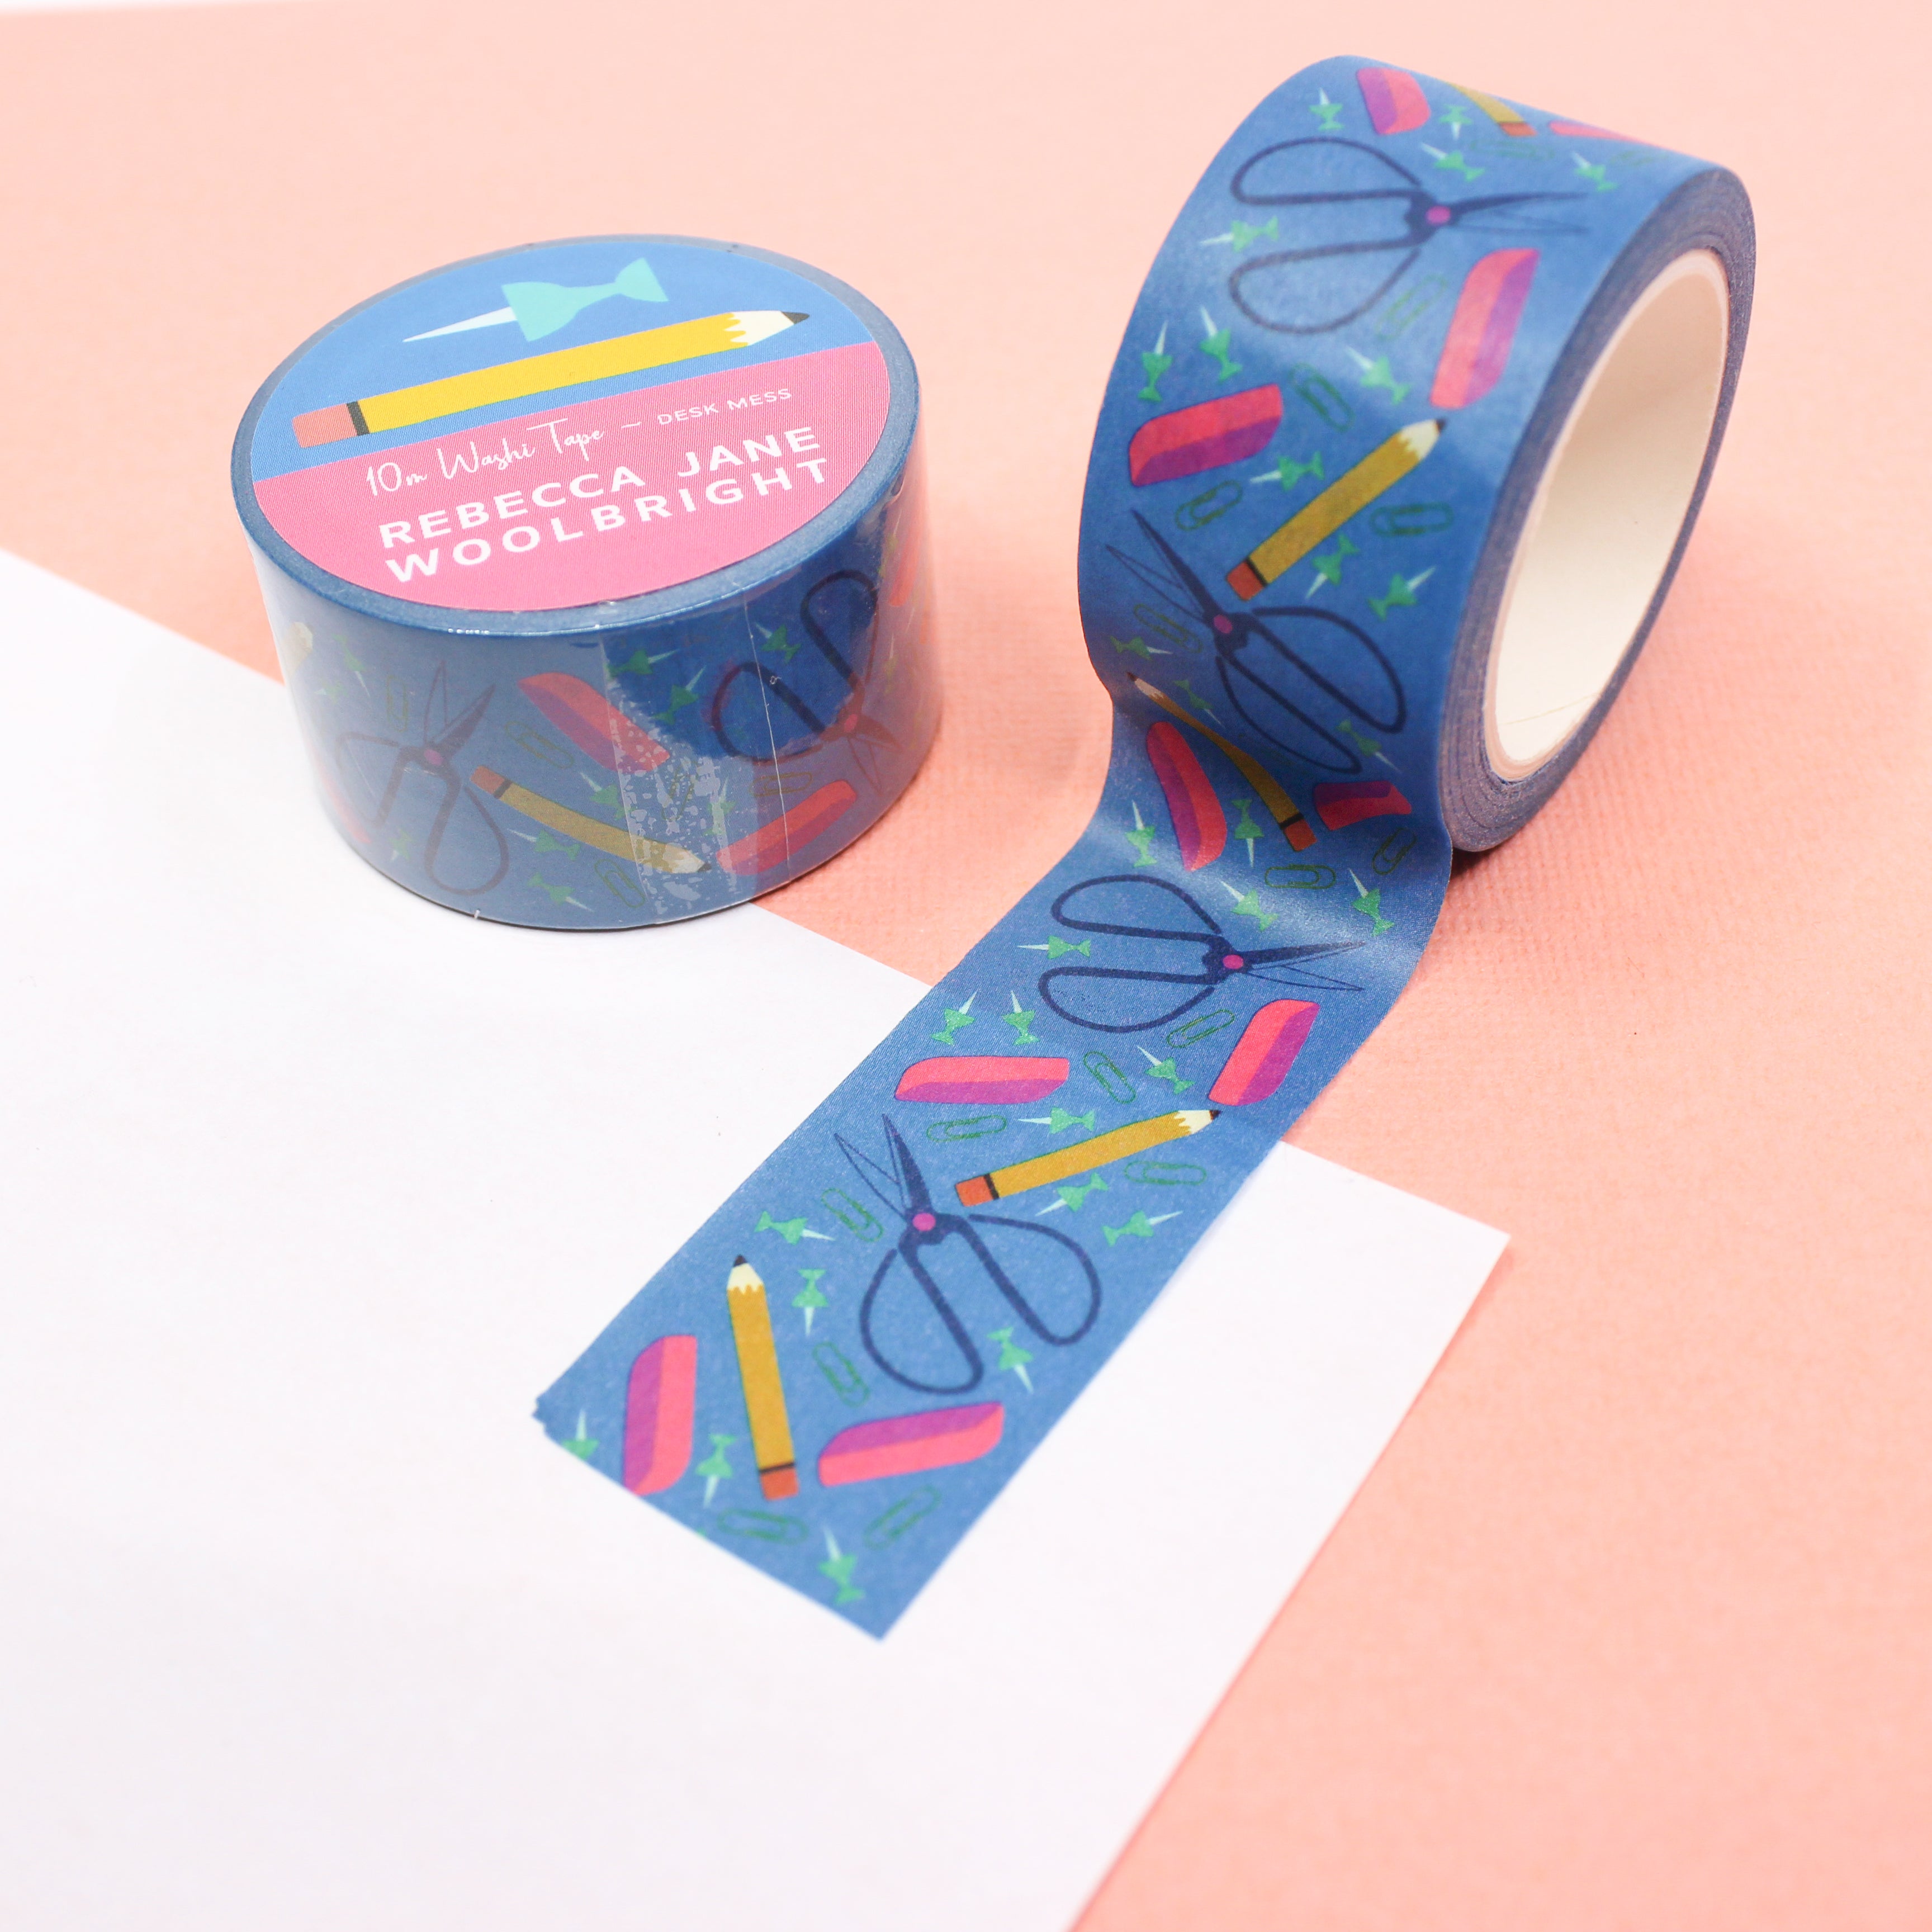 This is a fun desk mess view themed washi tape from BBB Supplies Craft Shop